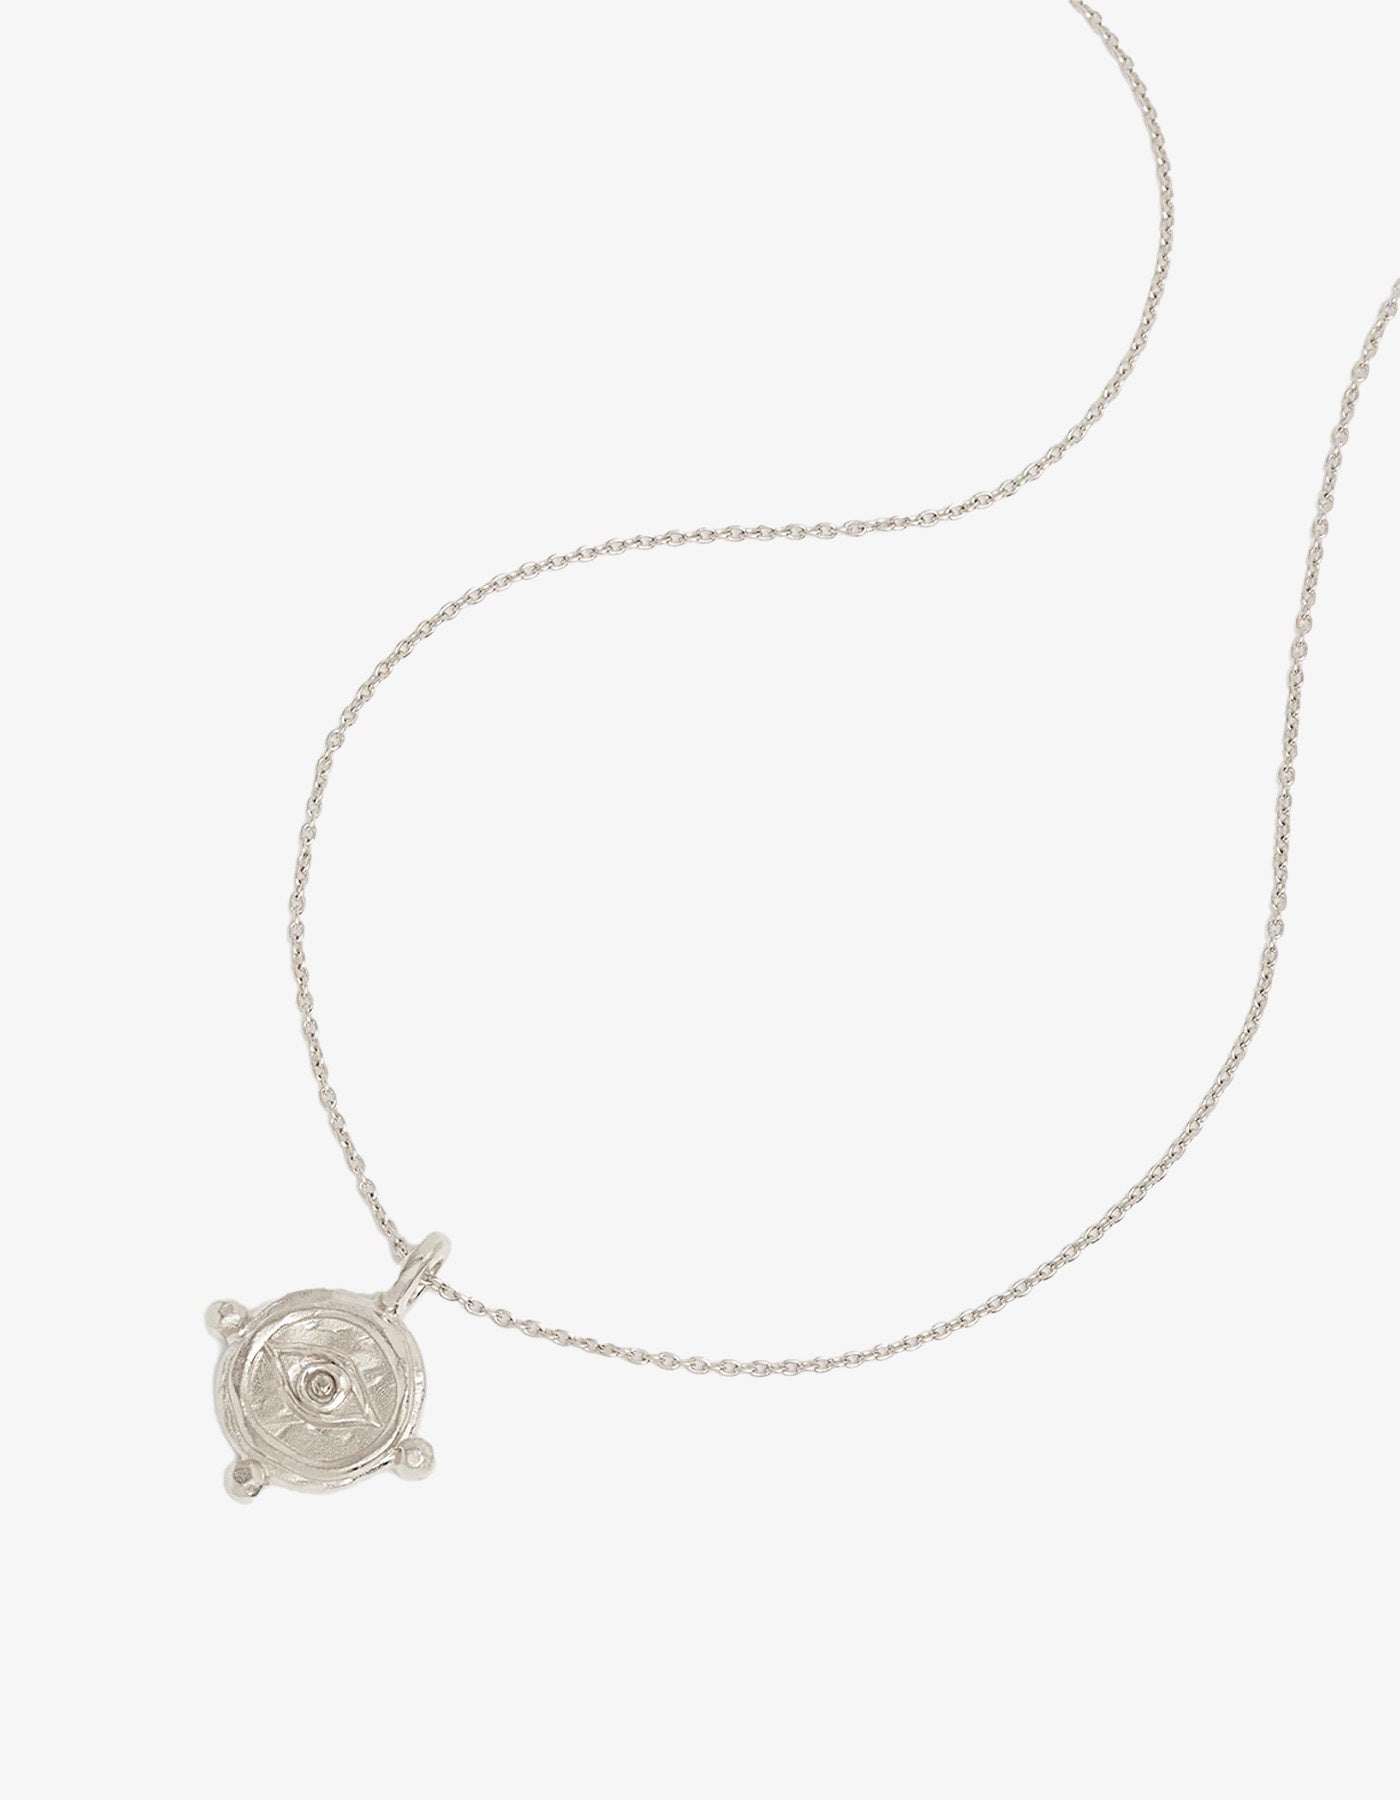 By Charlotte Luck & Love Necklace Silver